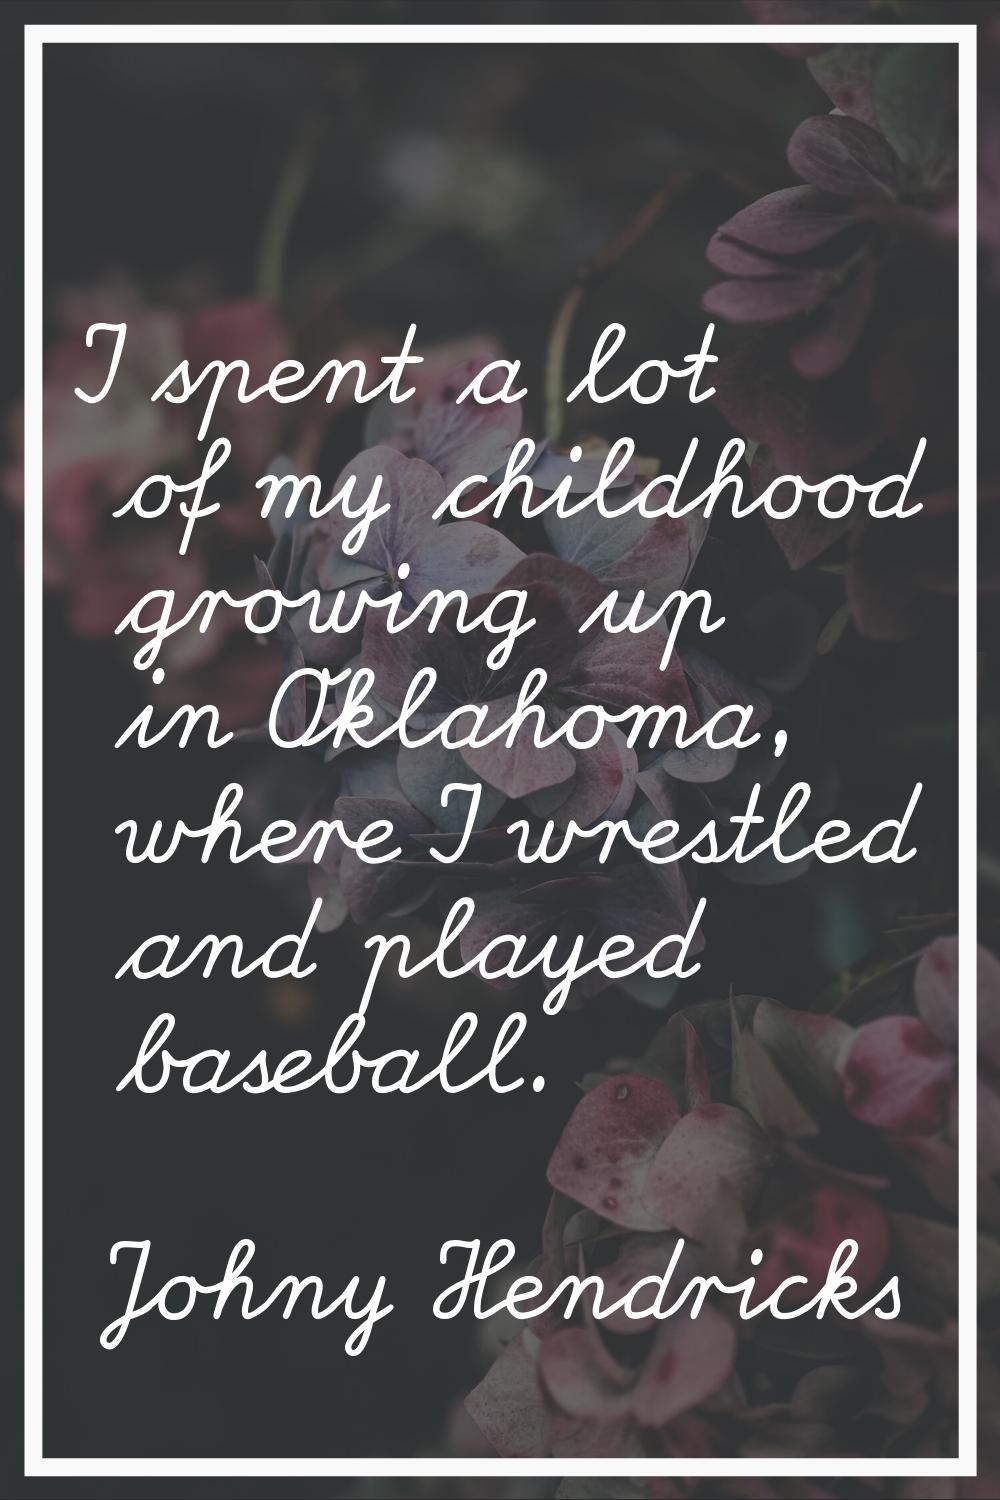 I spent a lot of my childhood growing up in Oklahoma, where I wrestled and played baseball.